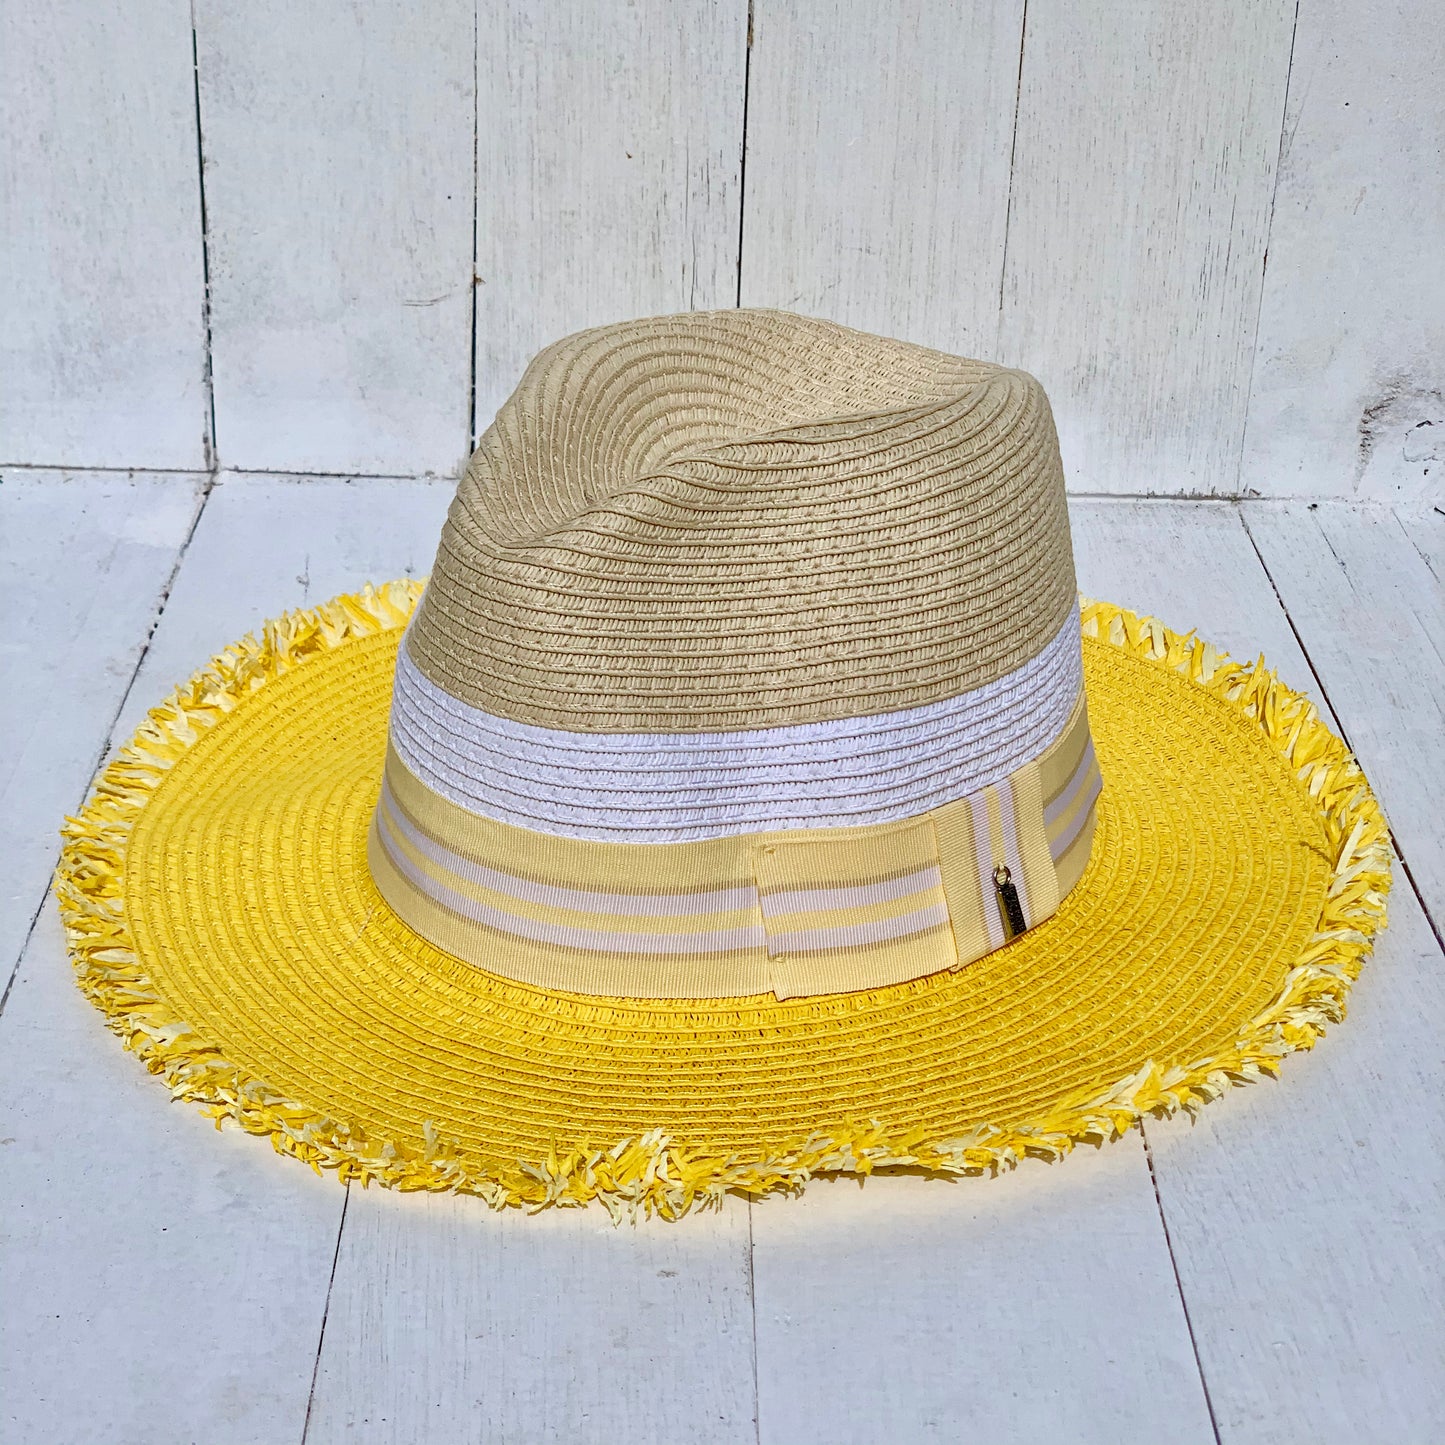 Here Comes the SUN with BANGS, Trio Coloured Paper Hat - UPF 50+